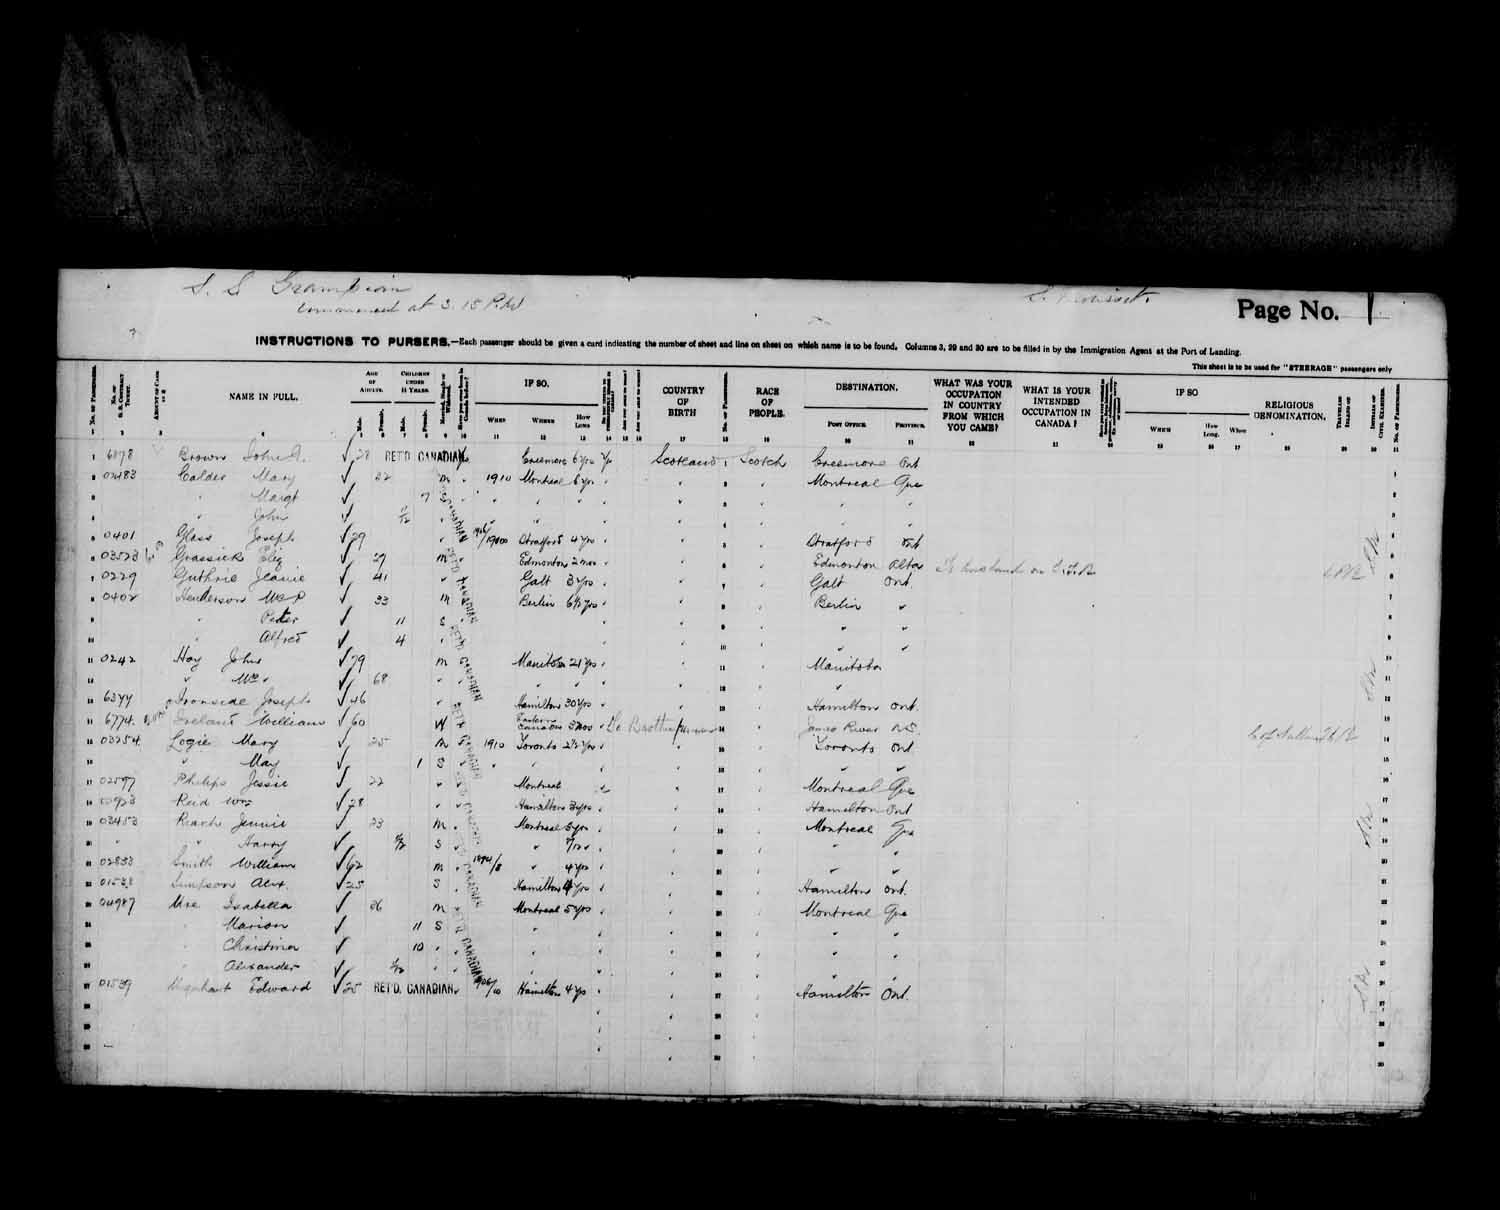 Digitized page of Passenger Lists for Image No.: e003566520